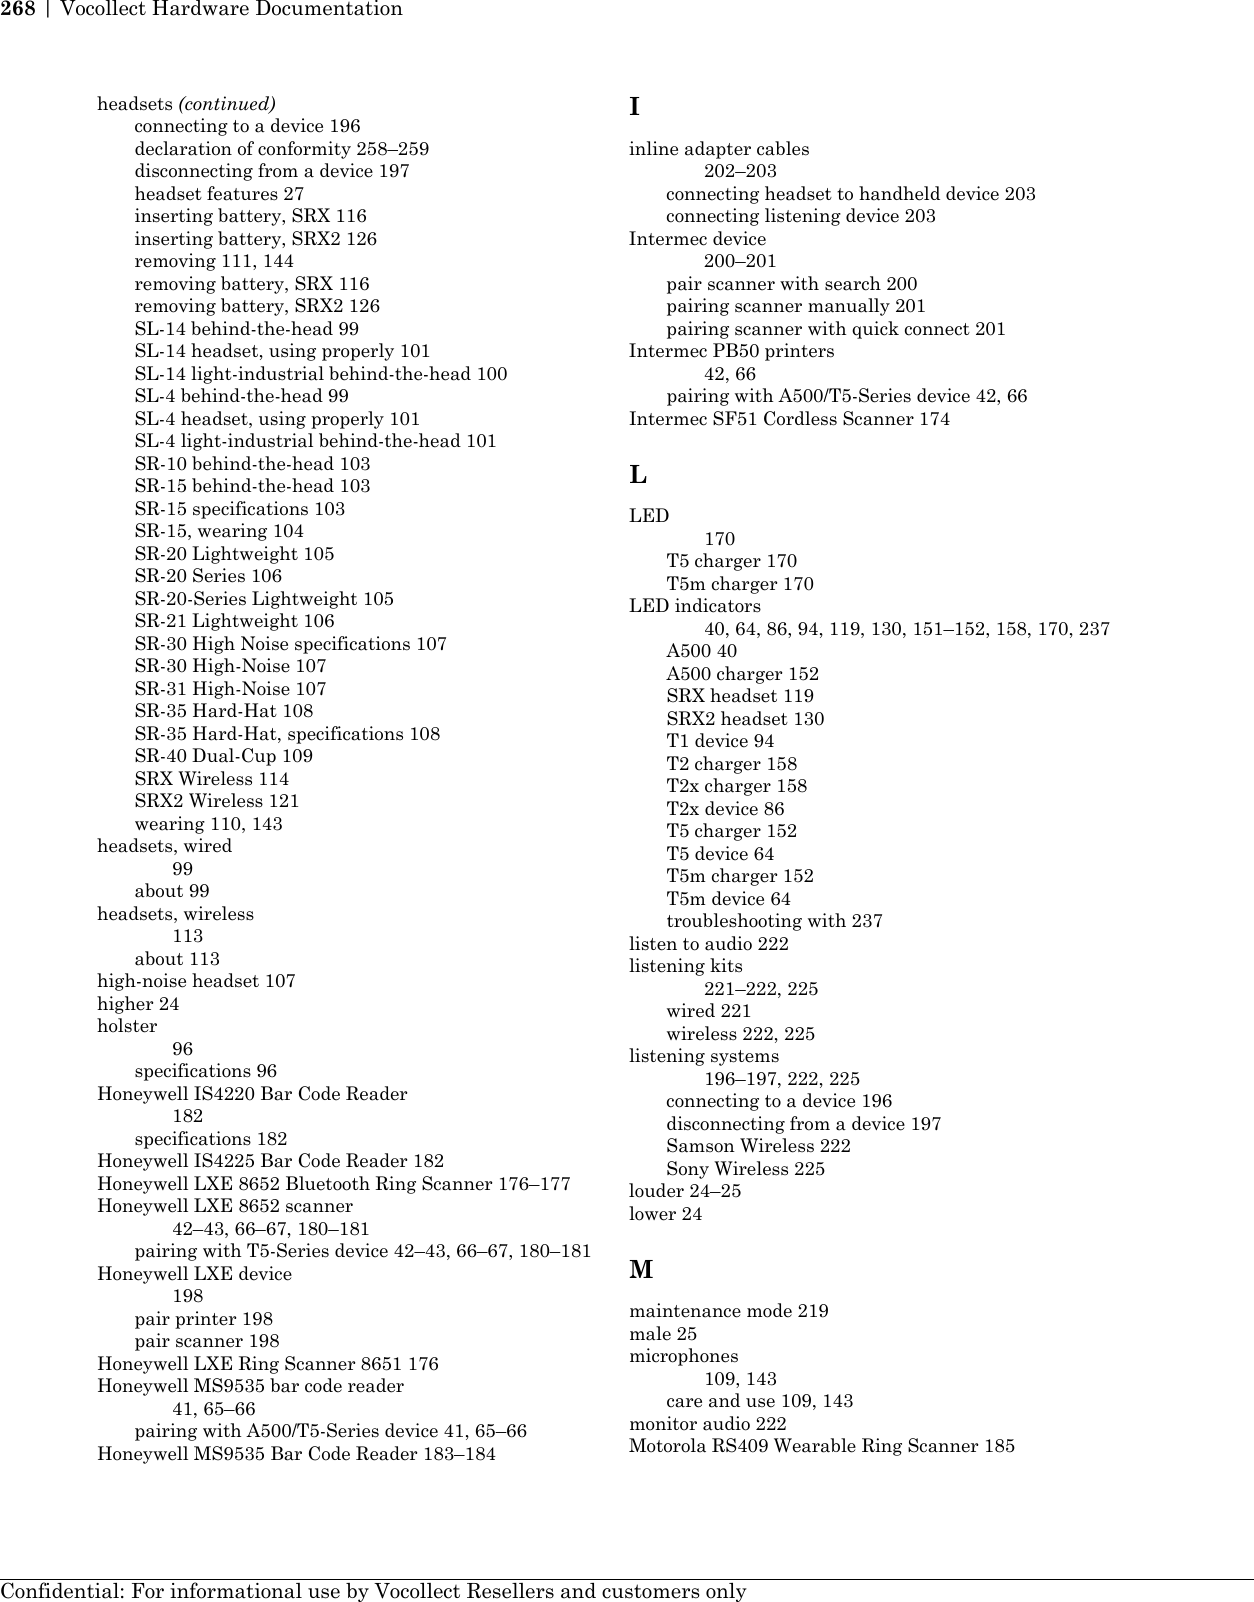 headsets (continued)connecting to a device 196declaration of conformity 258–259disconnecting from a device 197headset features 27inserting battery, SRX 116inserting battery, SRX2 126removing 111, 144removing battery, SRX 116removing battery, SRX2 126SL-14 behind-the-head 99SL-14 headset, using properly 101SL-14 light-industrial behind-the-head 100SL-4 behind-the-head 99SL-4 headset, using properly 101SL-4 light-industrial behind-the-head 101SR-10 behind-the-head 103SR-15 behind-the-head 103SR-15 specifications 103SR-15, wearing 104SR-20 Lightweight 105SR-20 Series 106SR-20-Series Lightweight 105SR-21 Lightweight 106SR-30 High Noise specifications 107SR-30 High-Noise 107SR-31 High-Noise 107SR-35 Hard-Hat 108SR-35 Hard-Hat, specifications 108SR-40 Dual-Cup 109SRX Wireless 114SRX2 Wireless 121wearing 110, 143headsets, wired99about 99headsets, wireless113about 113high-noise headset 107higher 24holster96specifications 96Honeywell IS4220 Bar Code Reader182specifications 182Honeywell IS4225 Bar Code Reader 182Honeywell LXE 8652 Bluetooth Ring Scanner 176–177Honeywell LXE 8652 scanner42–43, 66–67, 180–181pairing with T5-Series device 42–43, 66–67, 180–181Honeywell LXE device198pair printer 198pair scanner 198Honeywell LXE Ring Scanner 8651 176Honeywell MS9535 bar code reader41, 65–66pairing with A500/T5-Series device 41, 65–66Honeywell MS9535 Bar Code Reader 183–184Iinline adapter cables202–203connecting headset to handheld device 203connecting listening device 203Intermec device200–201pair scanner with search 200pairing scanner manually 201pairing scanner with quick connect 201Intermec PB50 printers42, 66pairing with A500/T5-Series device 42, 66Intermec SF51 Cordless Scanner 174LLED170T5 charger 170T5m charger 170LED indicators40, 64, 86, 94, 119, 130, 151–152, 158, 170, 237A500 40A500 charger 152SRX headset 119SRX2 headset 130T1 device 94T2 charger 158T2x charger 158T2x device 86T5 charger 152T5 device 64T5m charger 152T5m device 64troubleshooting with 237listen to audio 222listening kits221–222, 225wired 221wireless 222, 225listening systems196–197, 222, 225connecting to a device 196disconnecting from a device 197Samson Wireless 222Sony Wireless 225louder 24–25lower 24Mmaintenance mode 219male 25microphones109, 143care and use 109, 143monitor audio 222Motorola RS409 Wearable Ring Scanner 185Confidential: For informational use by Vocollect Resellers and customers only268 | Vocollect Hardware Documentation